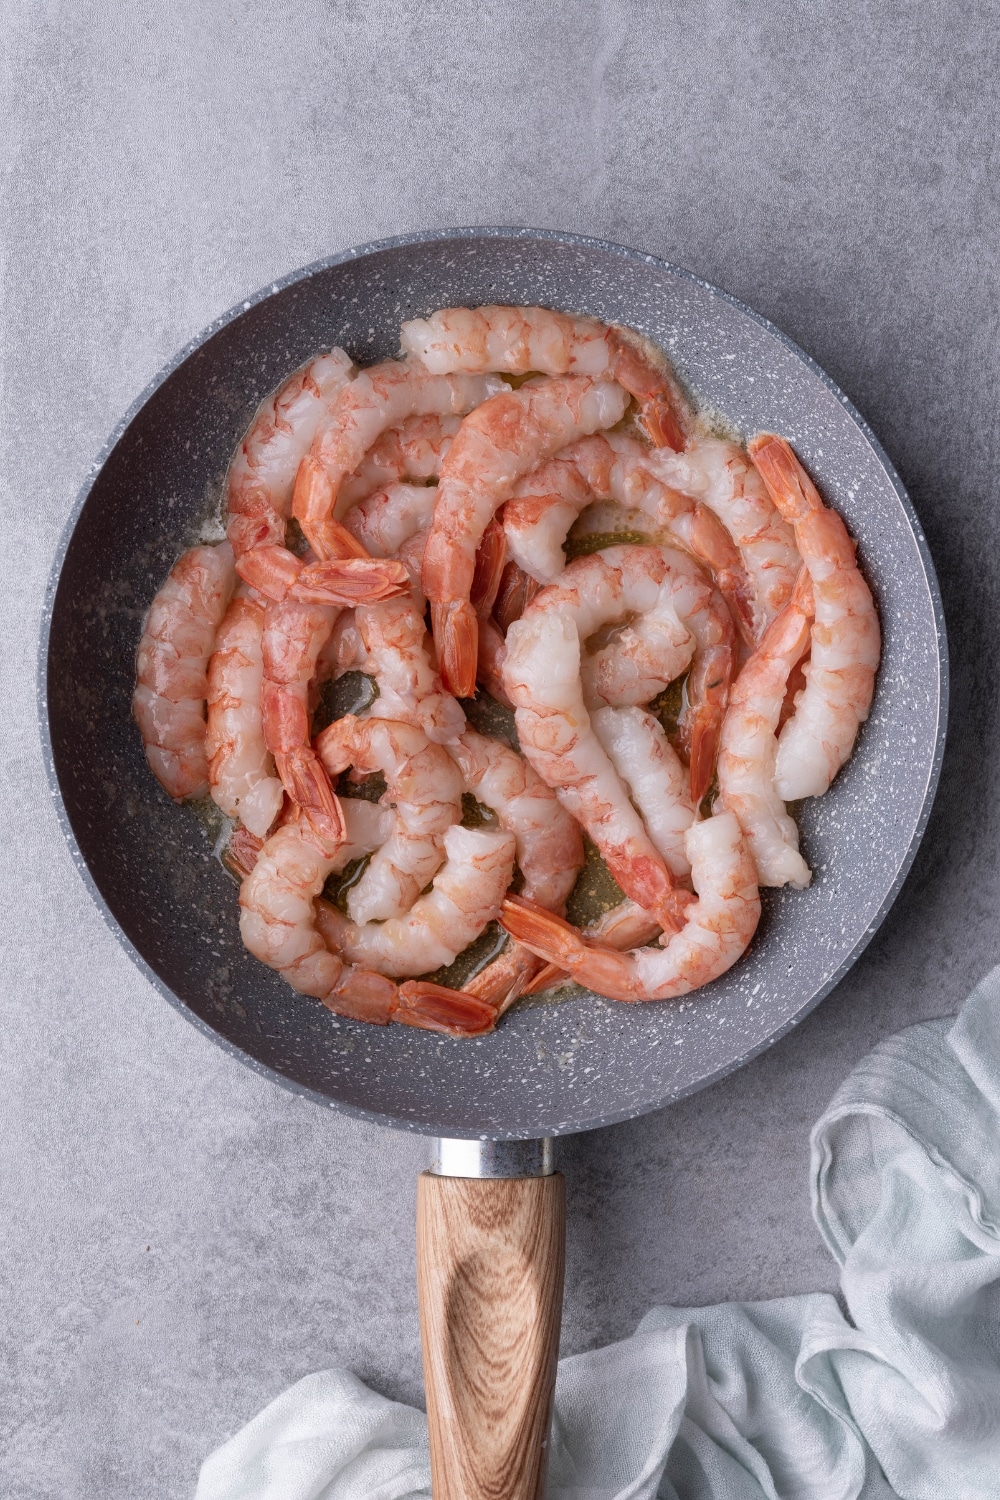 Partially cooked tail-on shrimp sauteing in melted butter in a speckled grey pan. The pan has a wooden handle and is resting on a grey countertop.